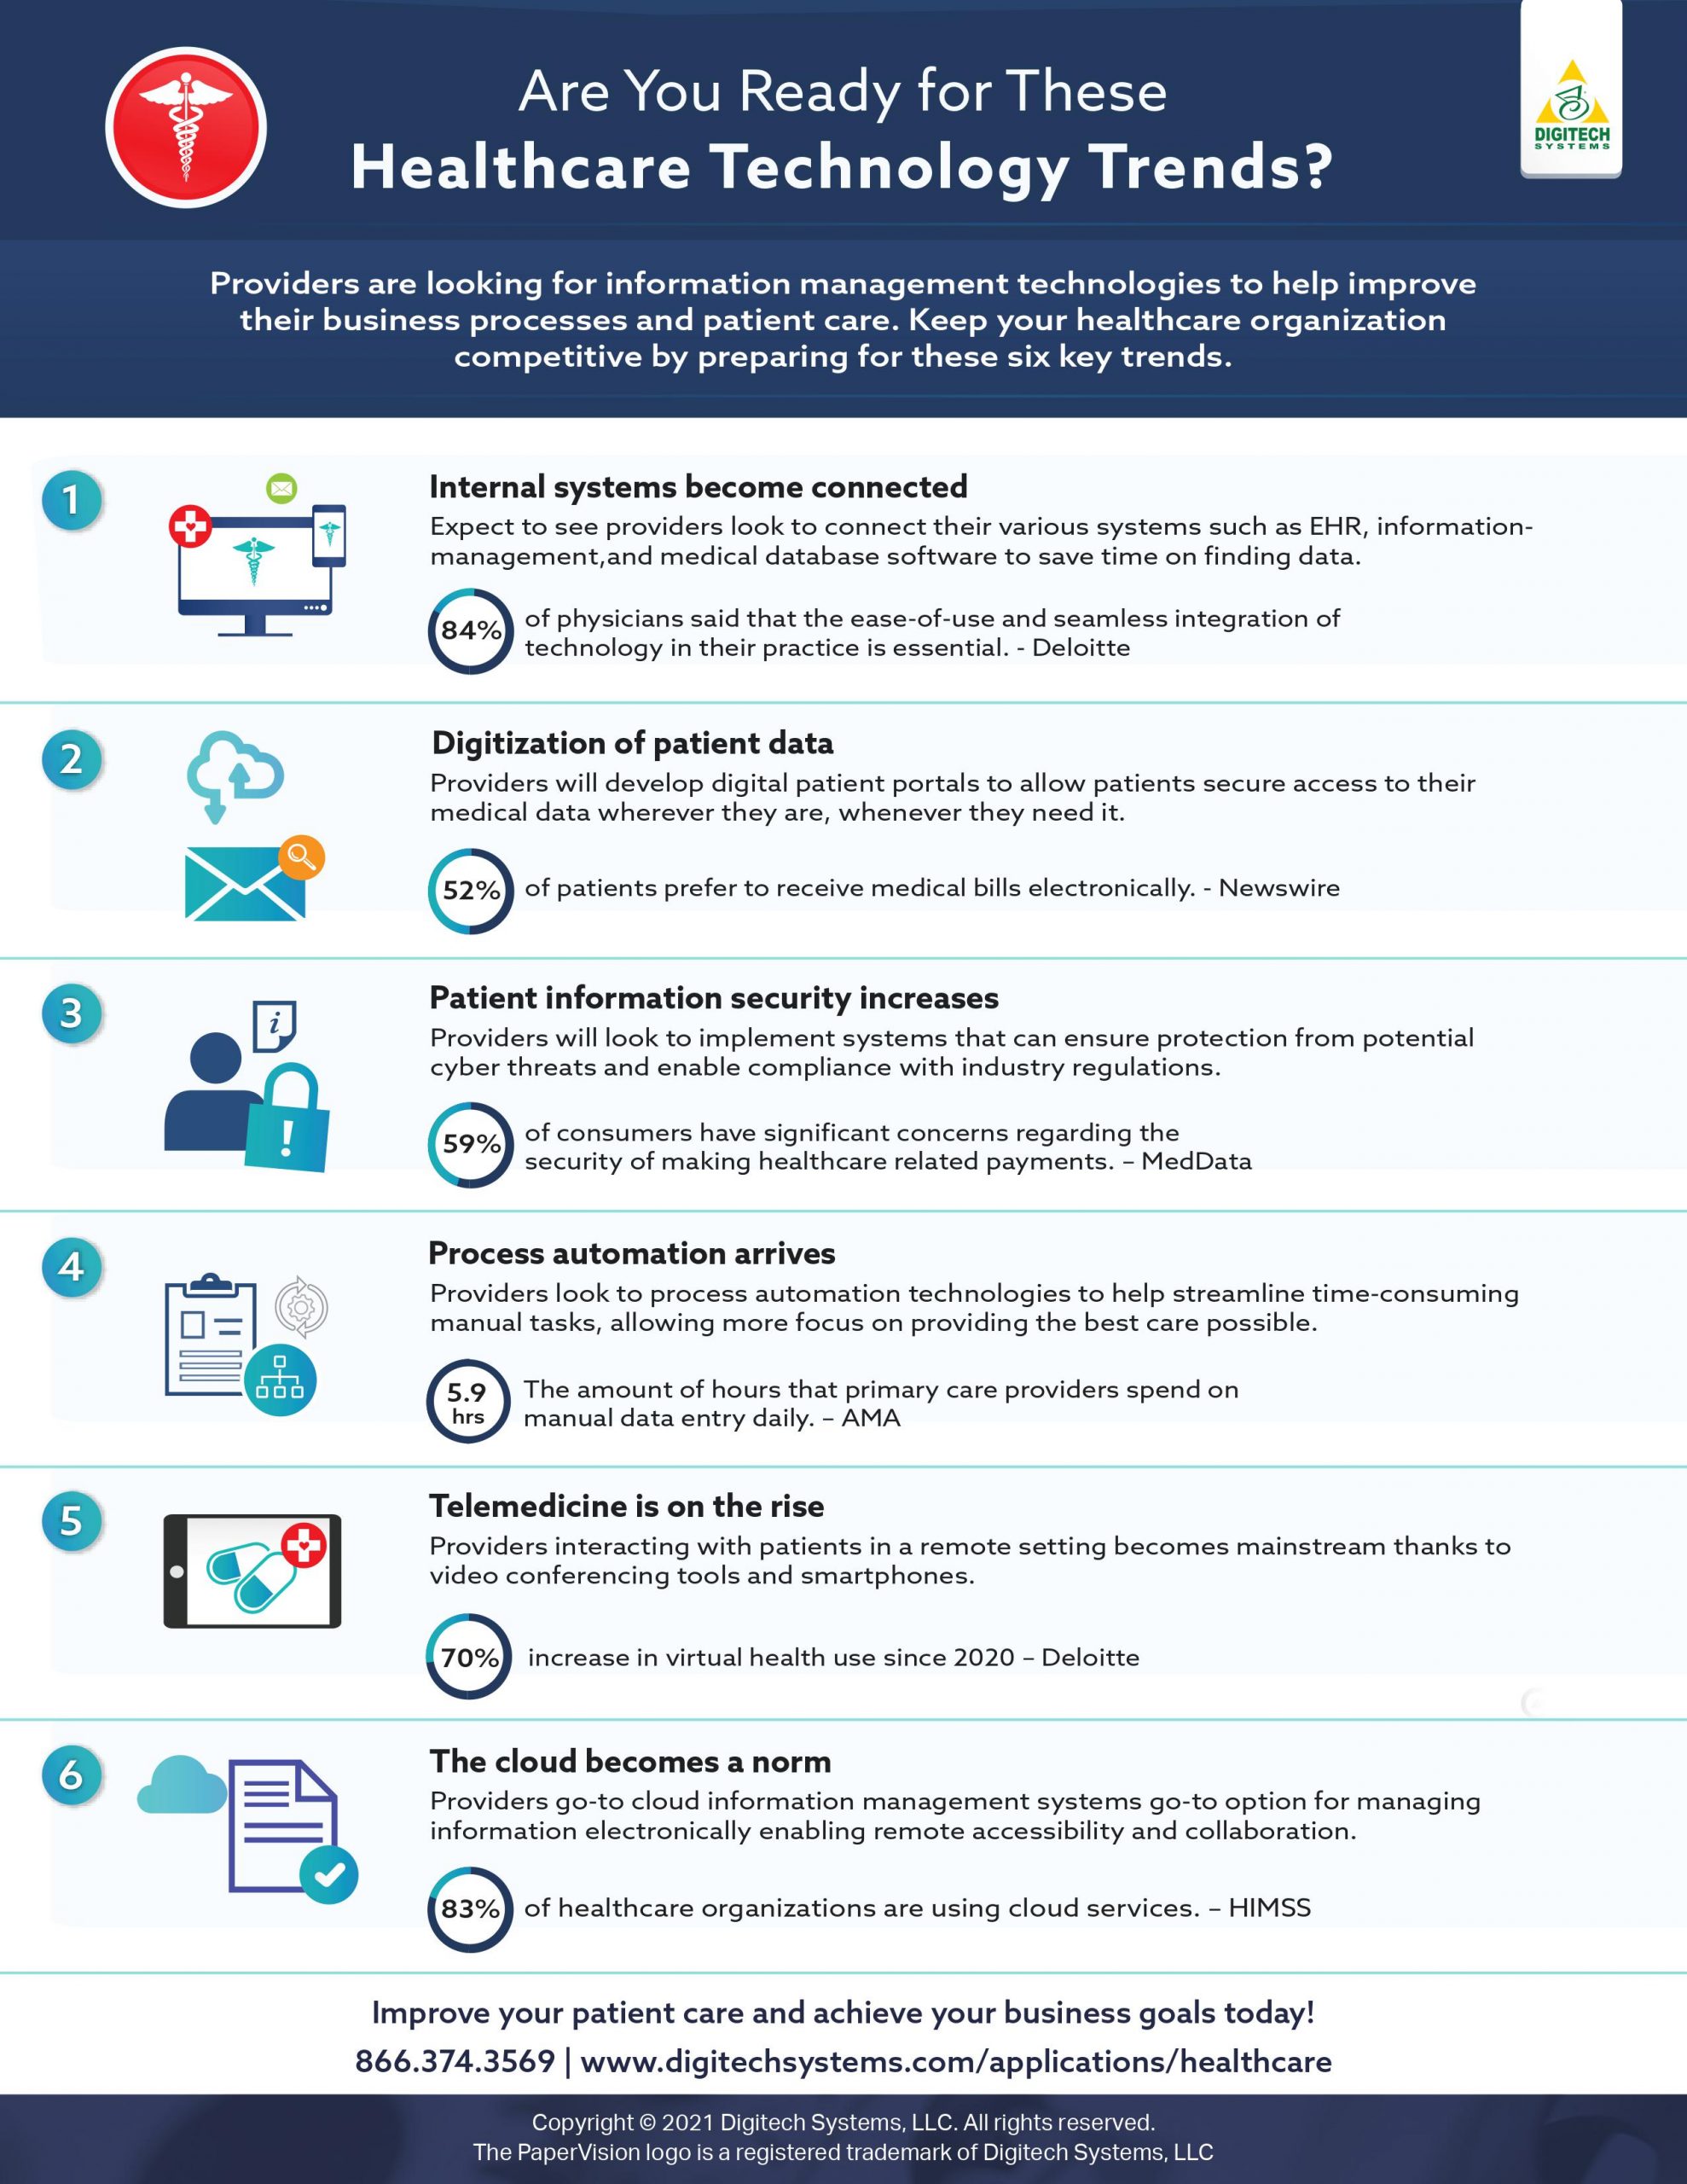 Healthcare trends infographic image